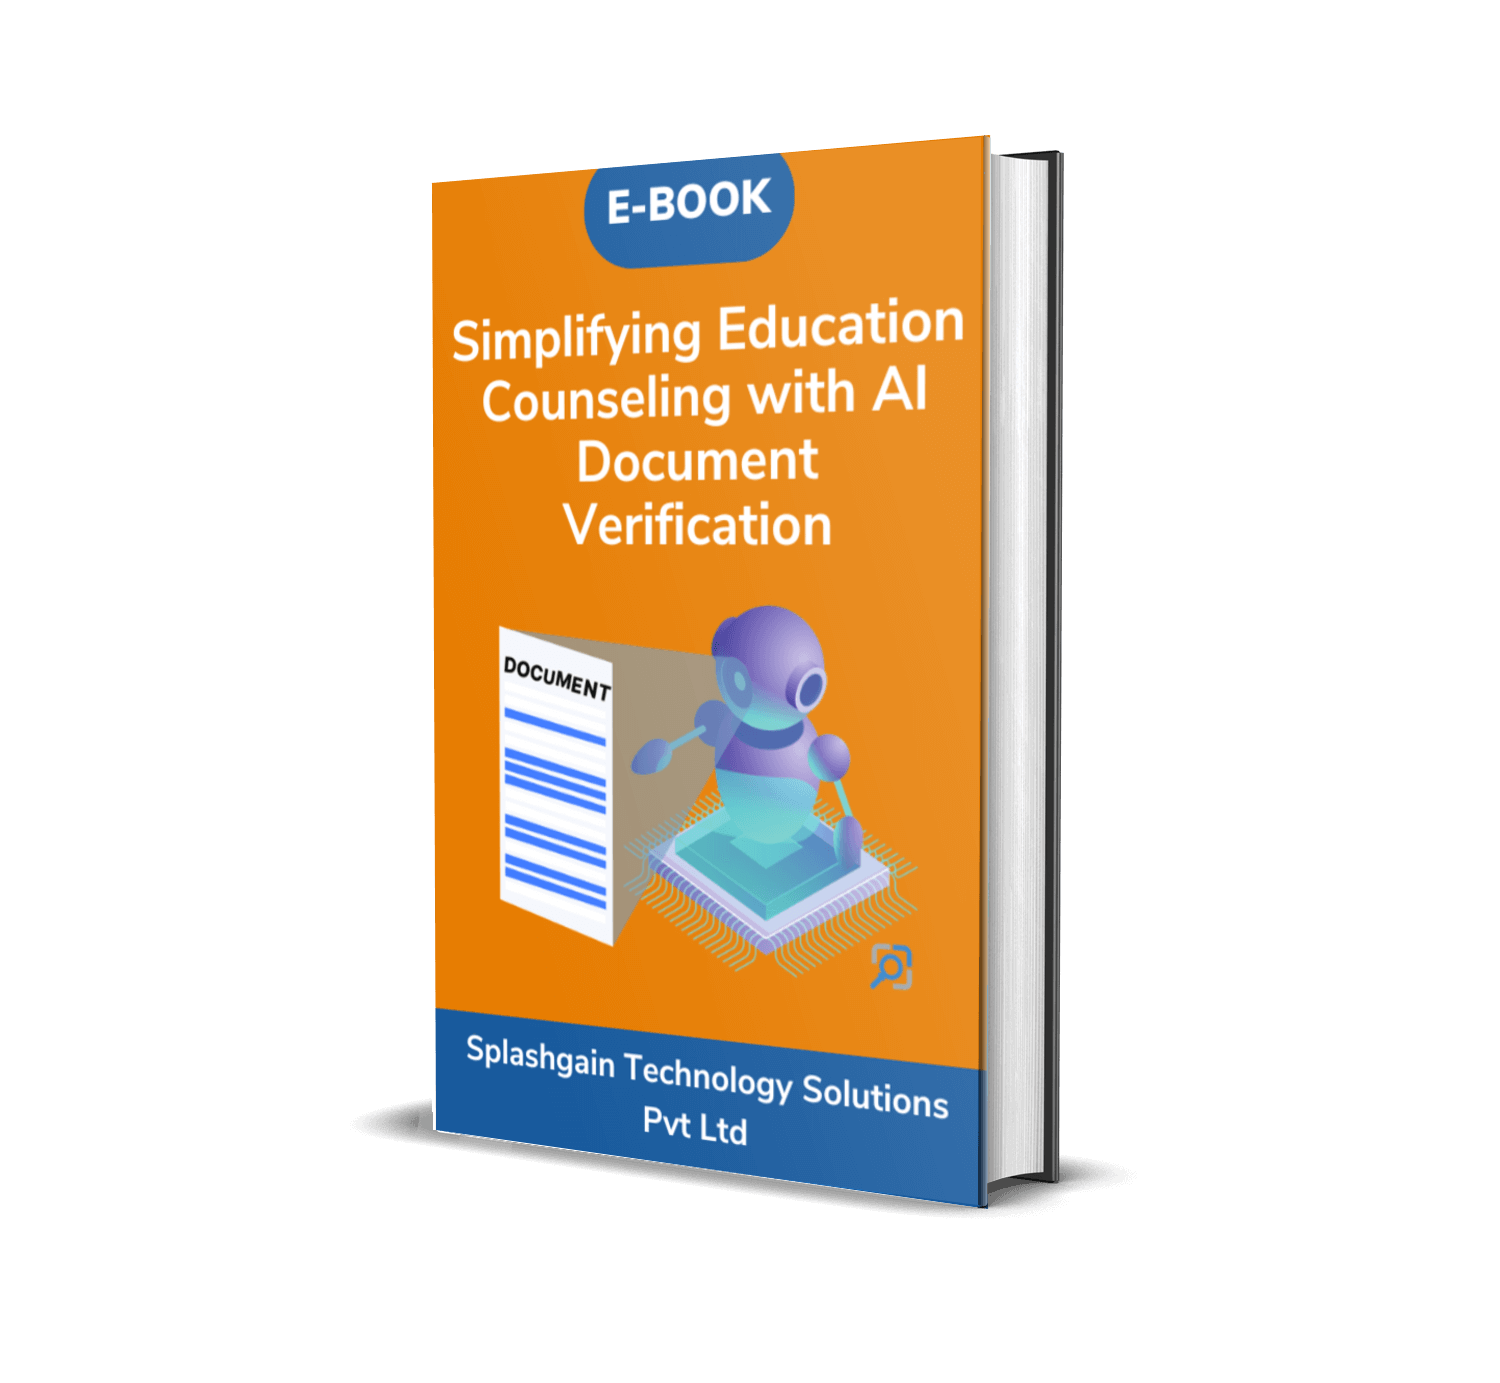 Simplifying Education Counseling with AI Document Verification ebook